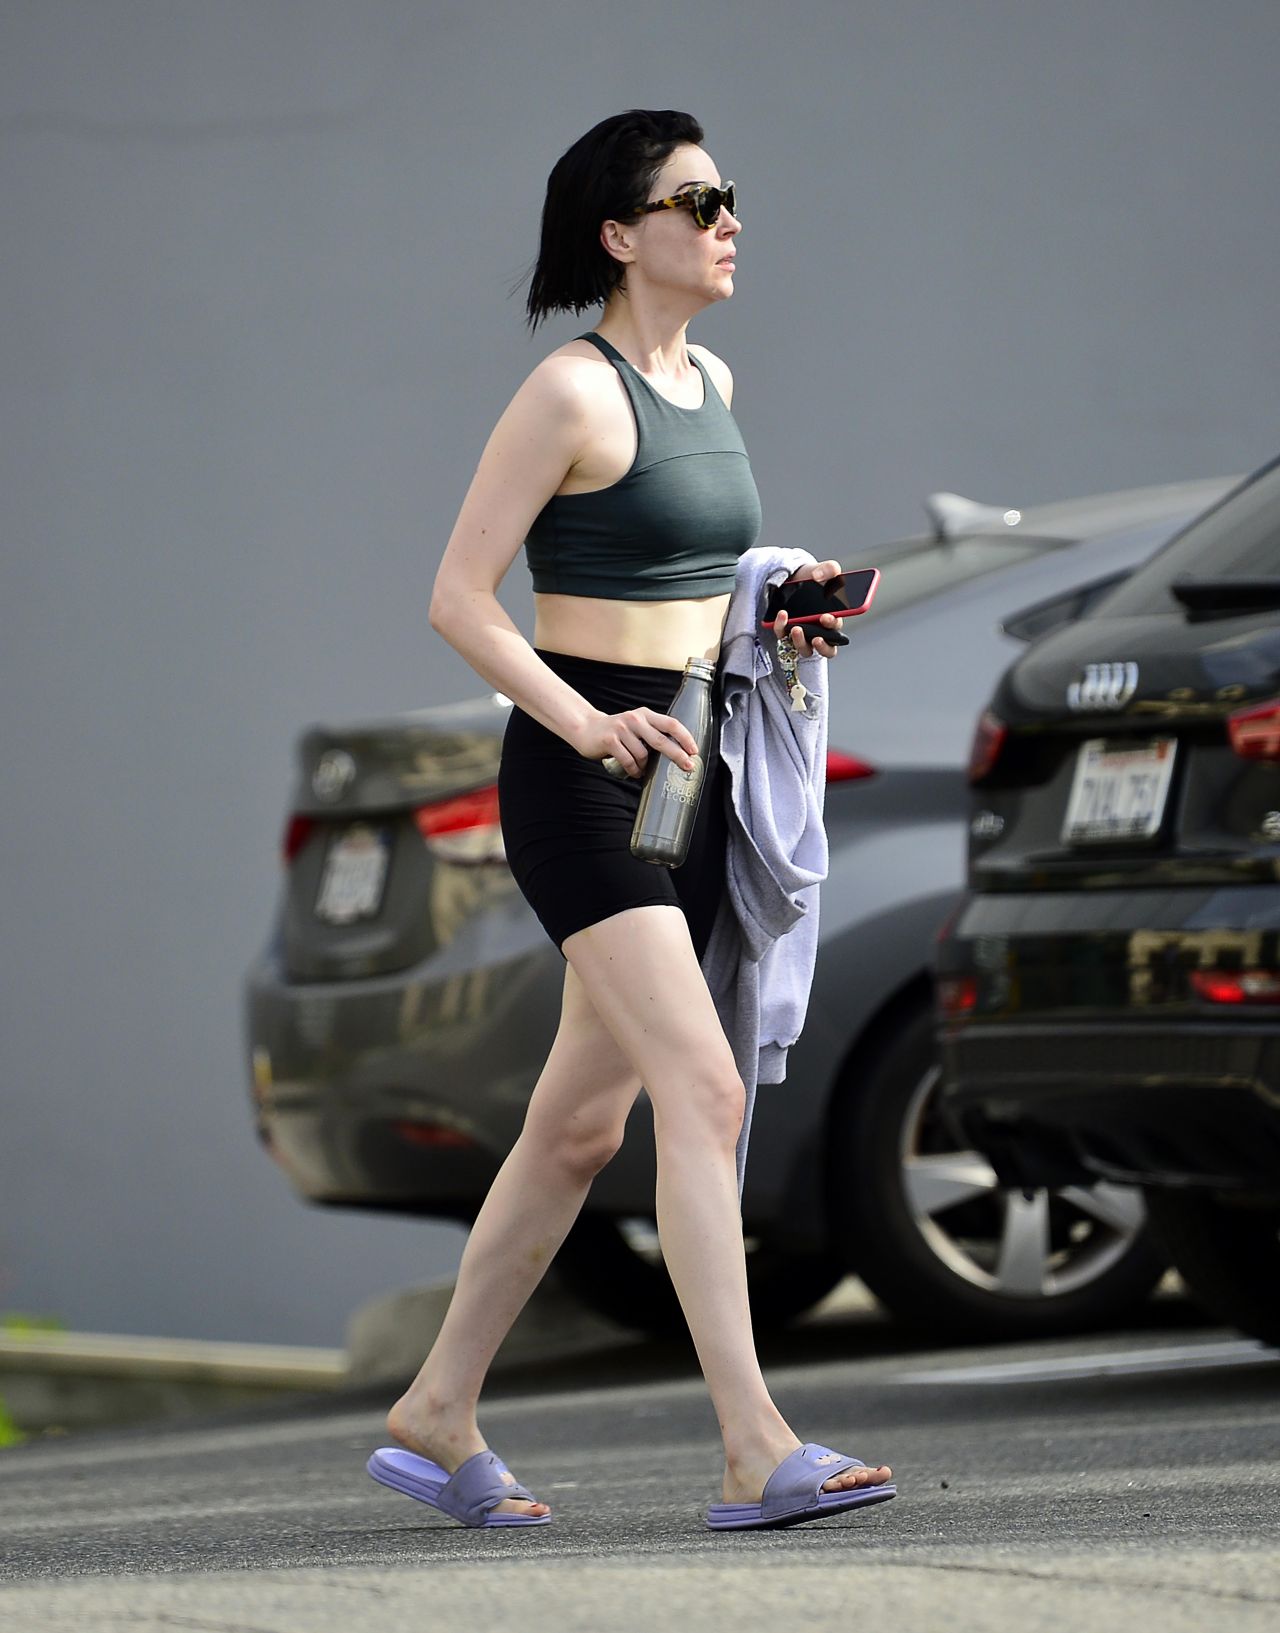 Laura Prepon in Tight Workout Clothes 01/20/2019.